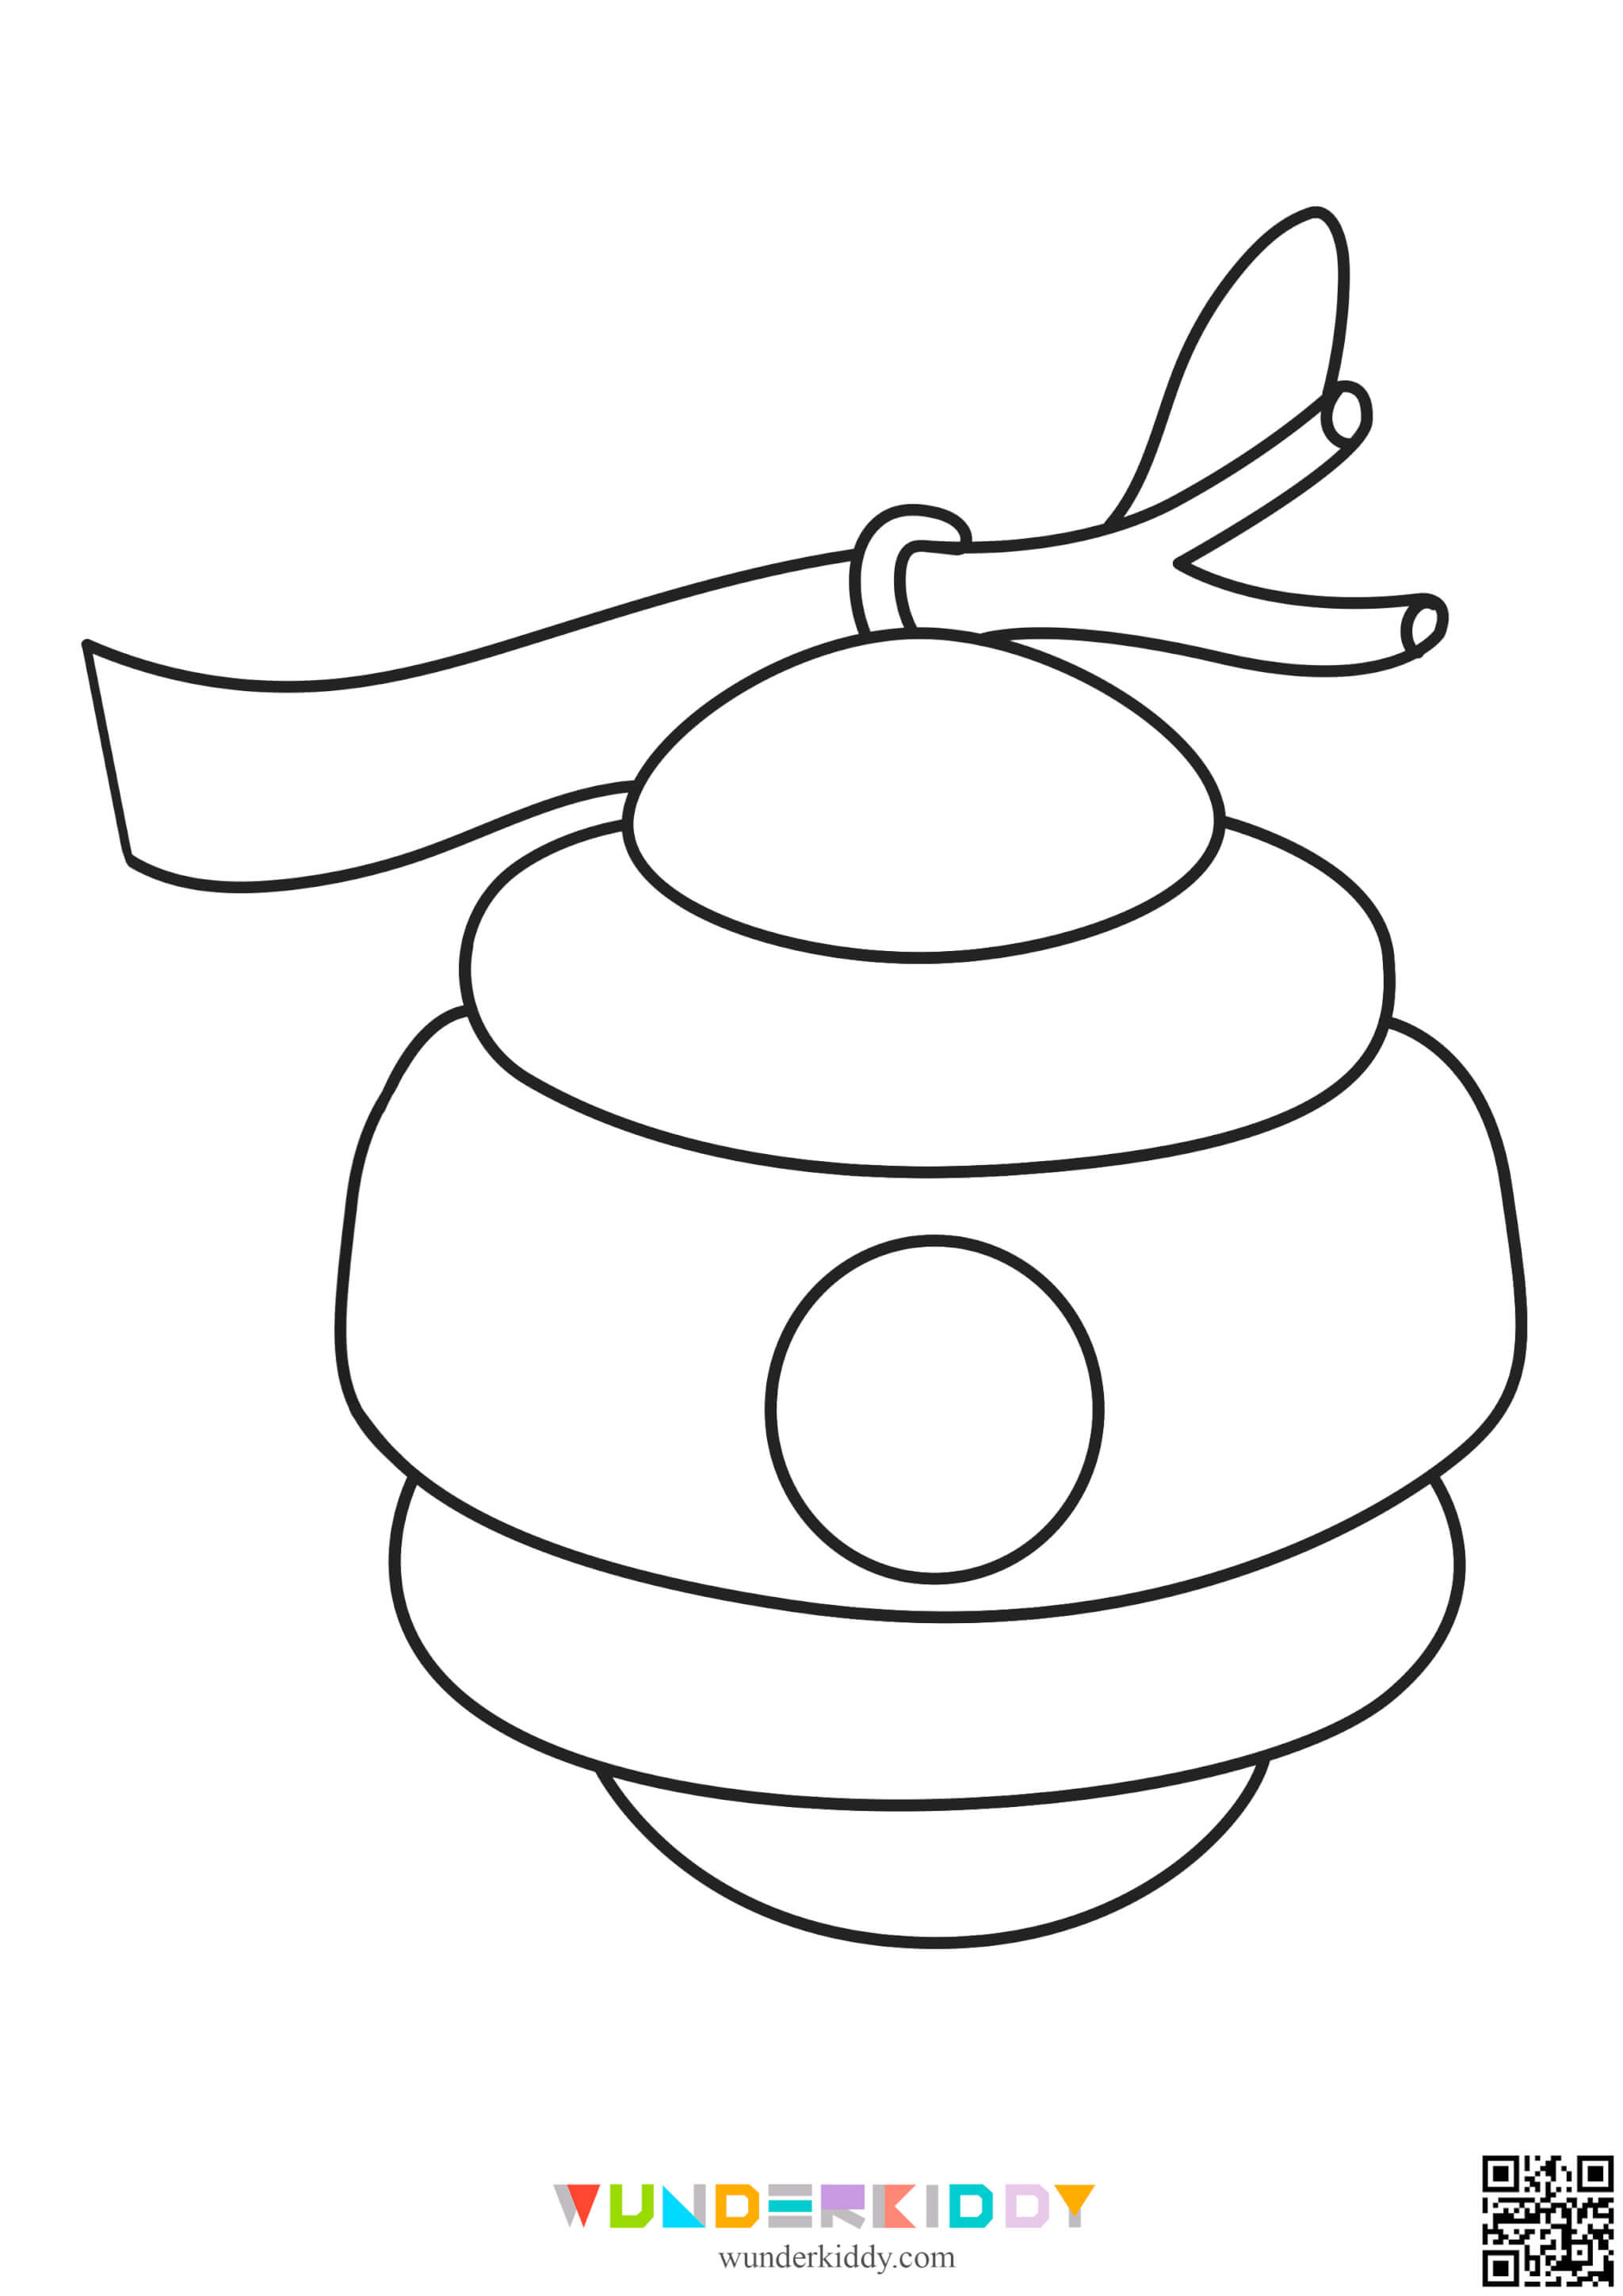 Beehive Template for Workshops - Image 2